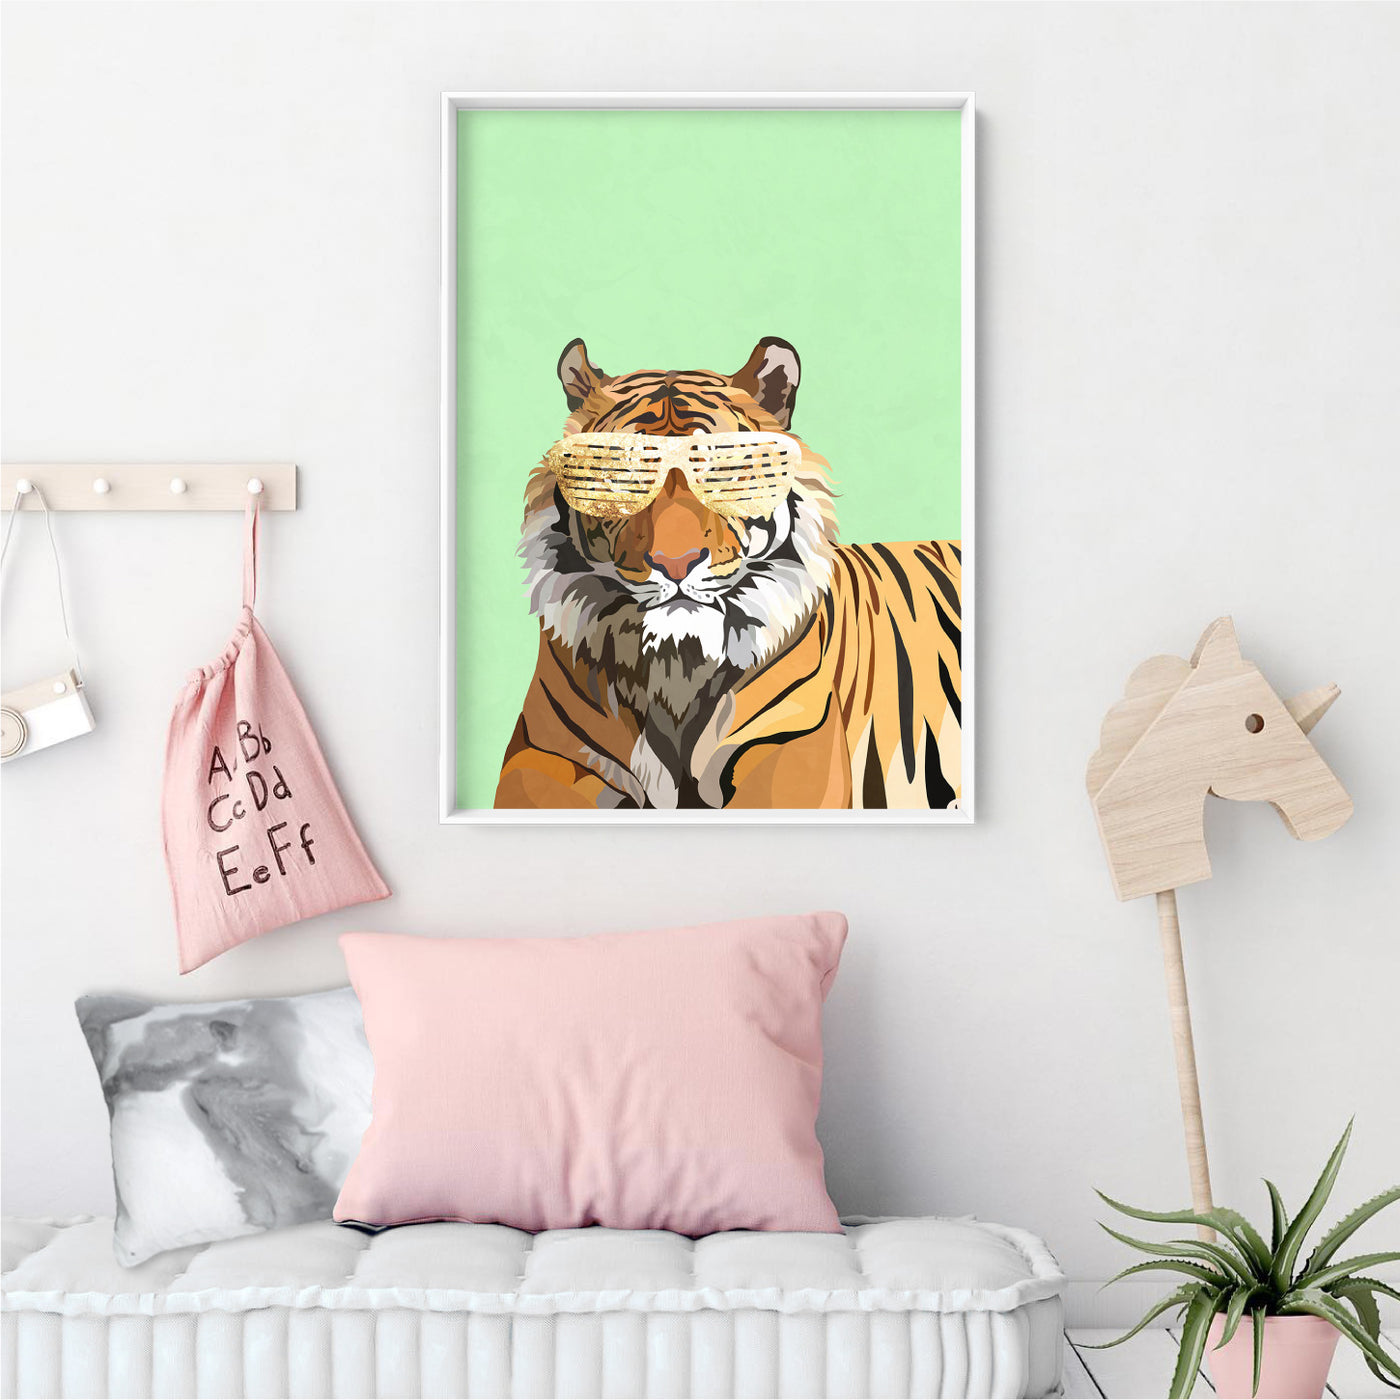 Tiger Pop - Art Print, Poster, Stretched Canvas or Framed Wall Art Prints, shown framed in a room